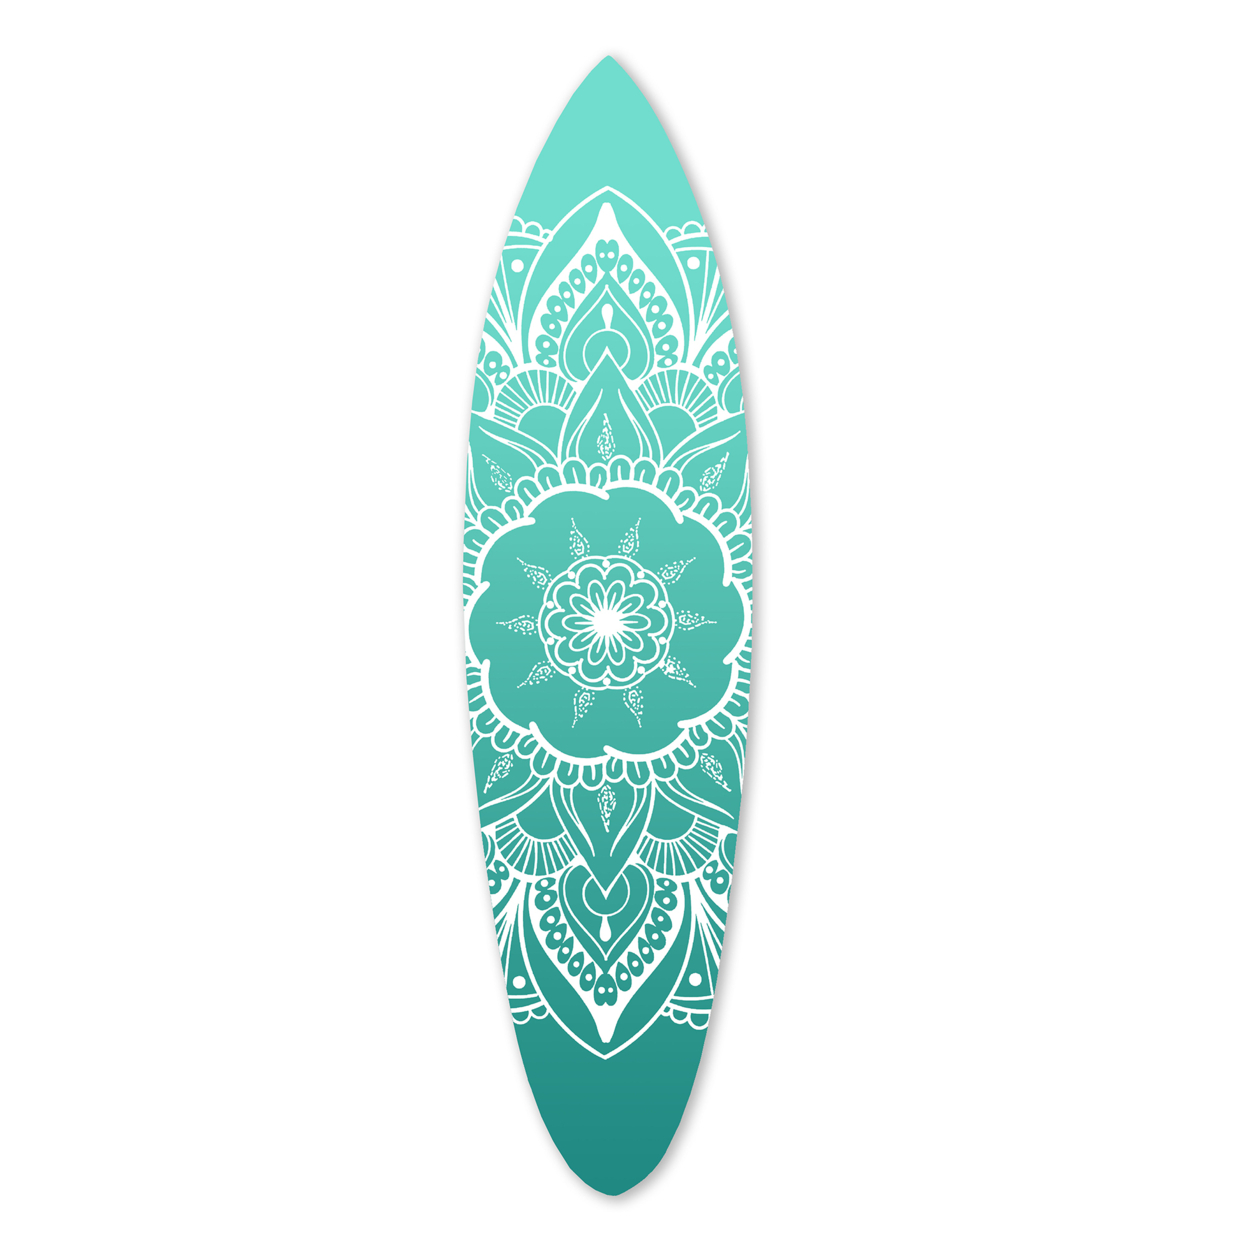 Wooden Surfboard Wall Art With Medallion Print, Blue And White- Saltoro Sherpi